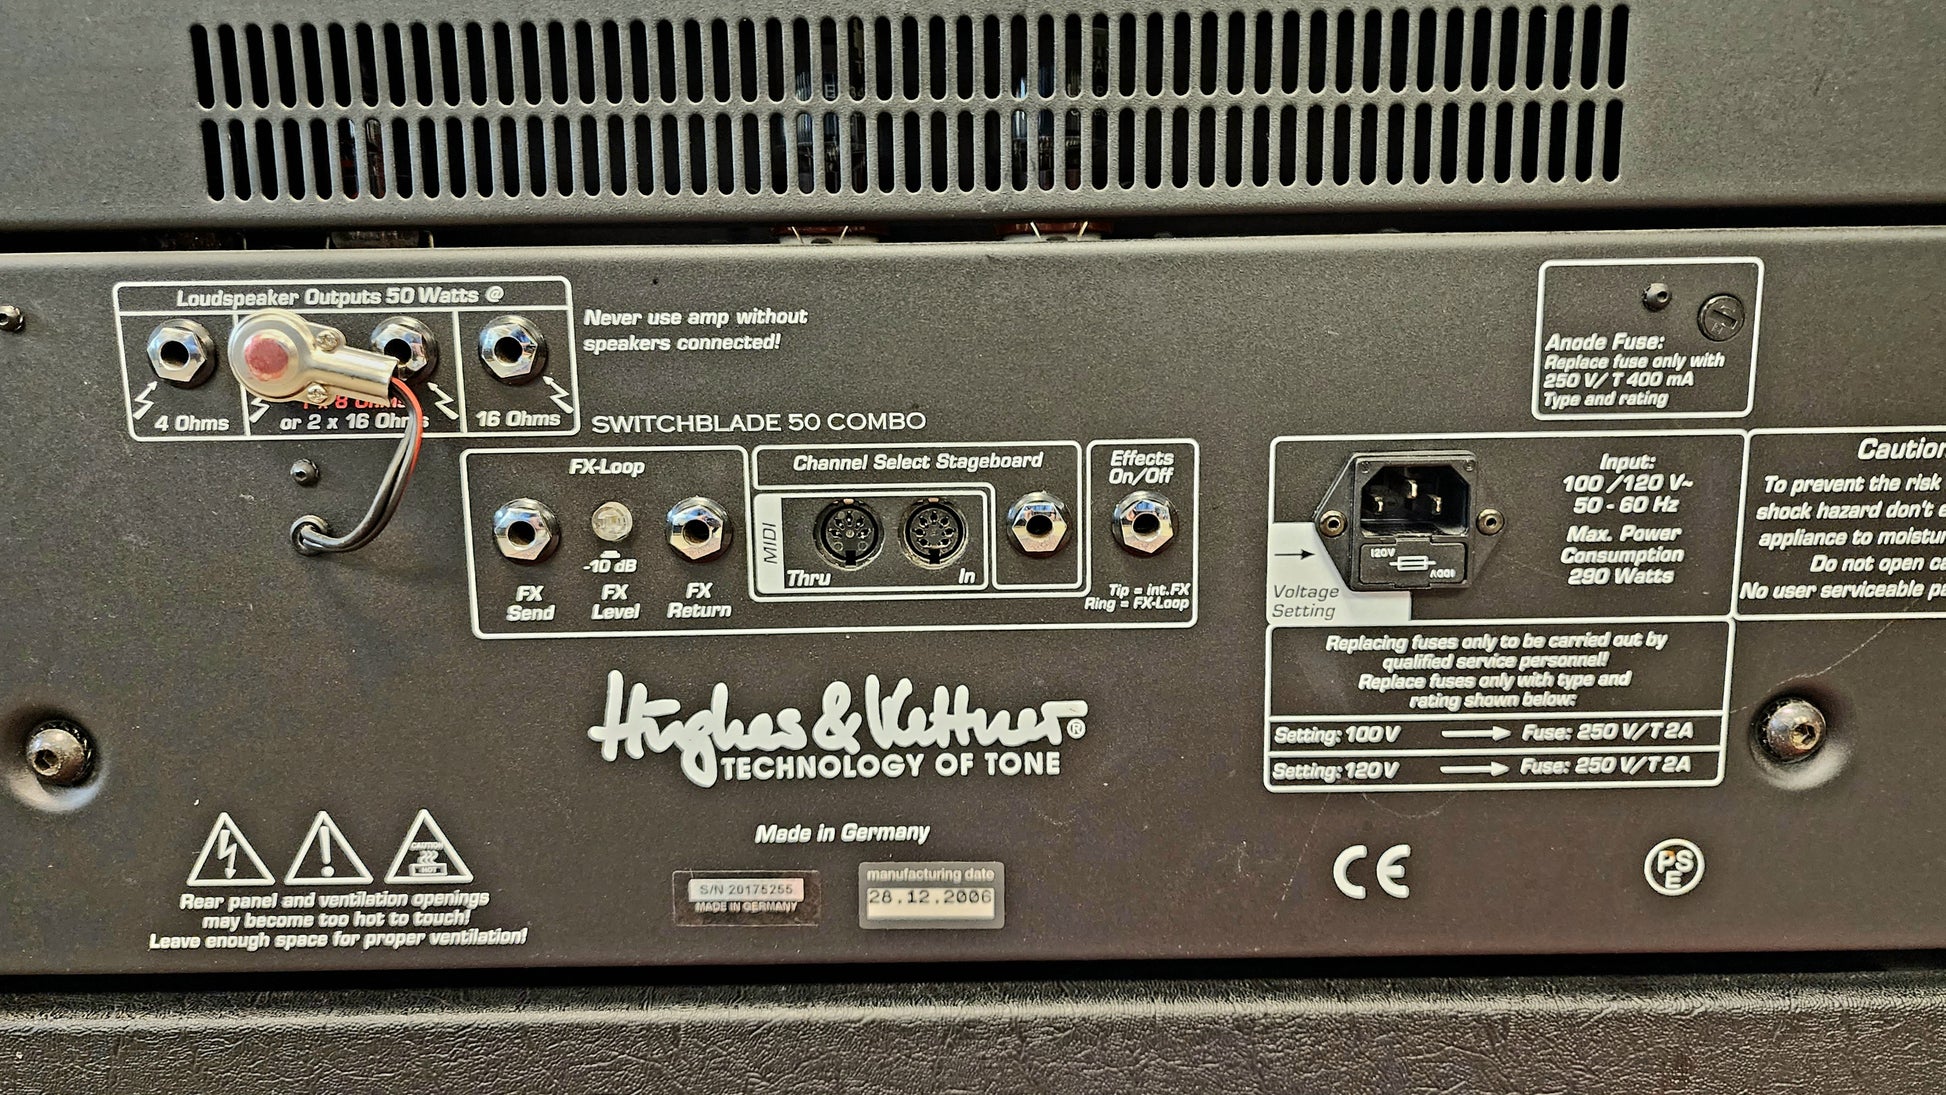 USED Hughes & Kettner Switchblade 50w Combo Tube Amplifier 1x12